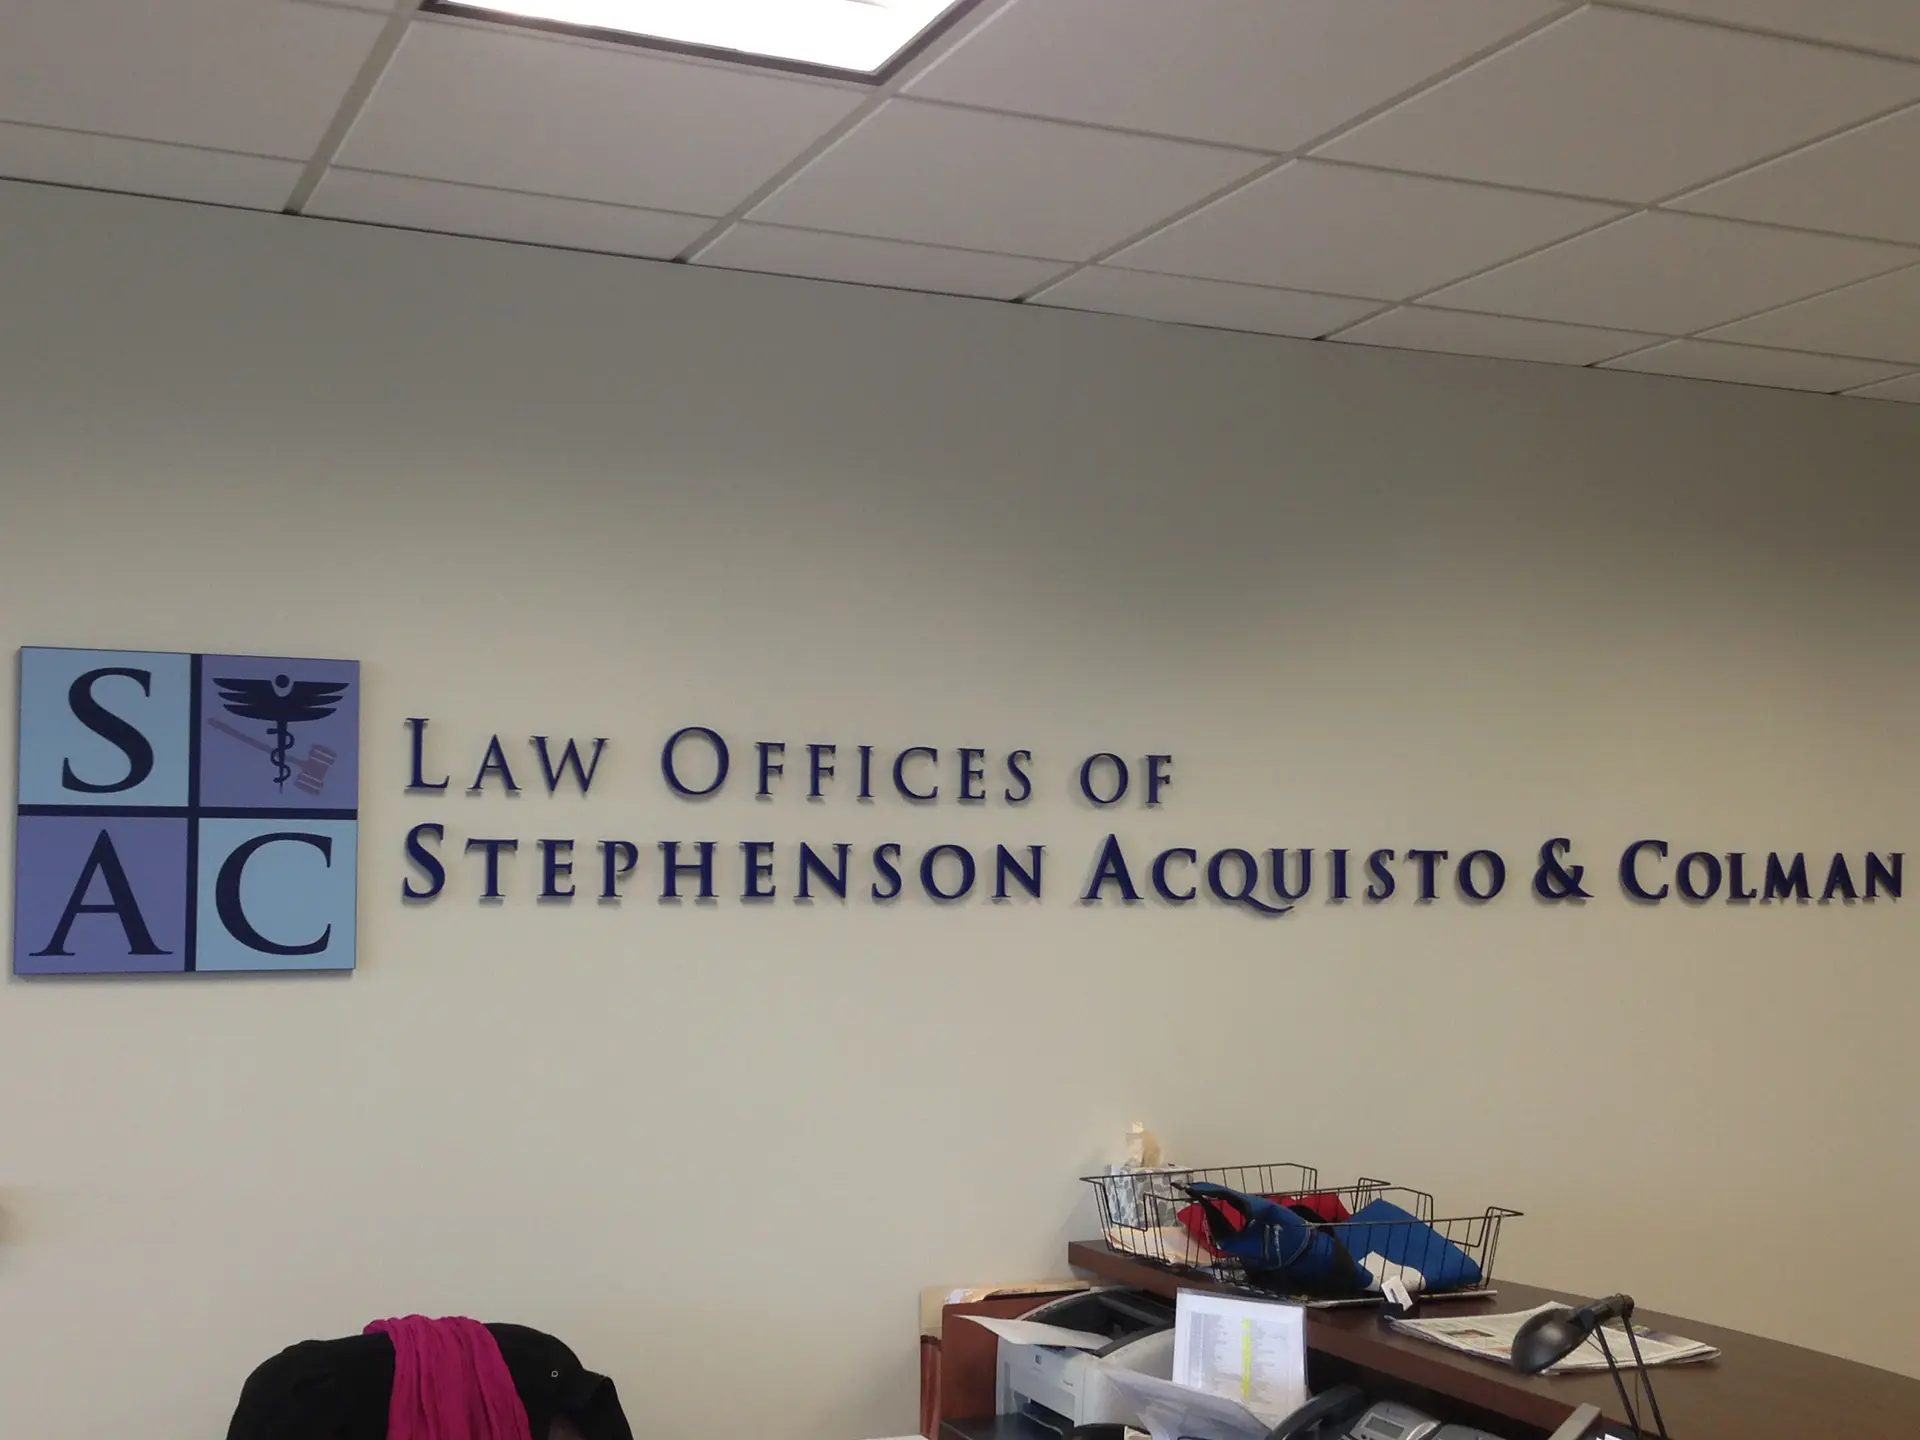 Law Offices Of Stephenson Acquisto & Colman